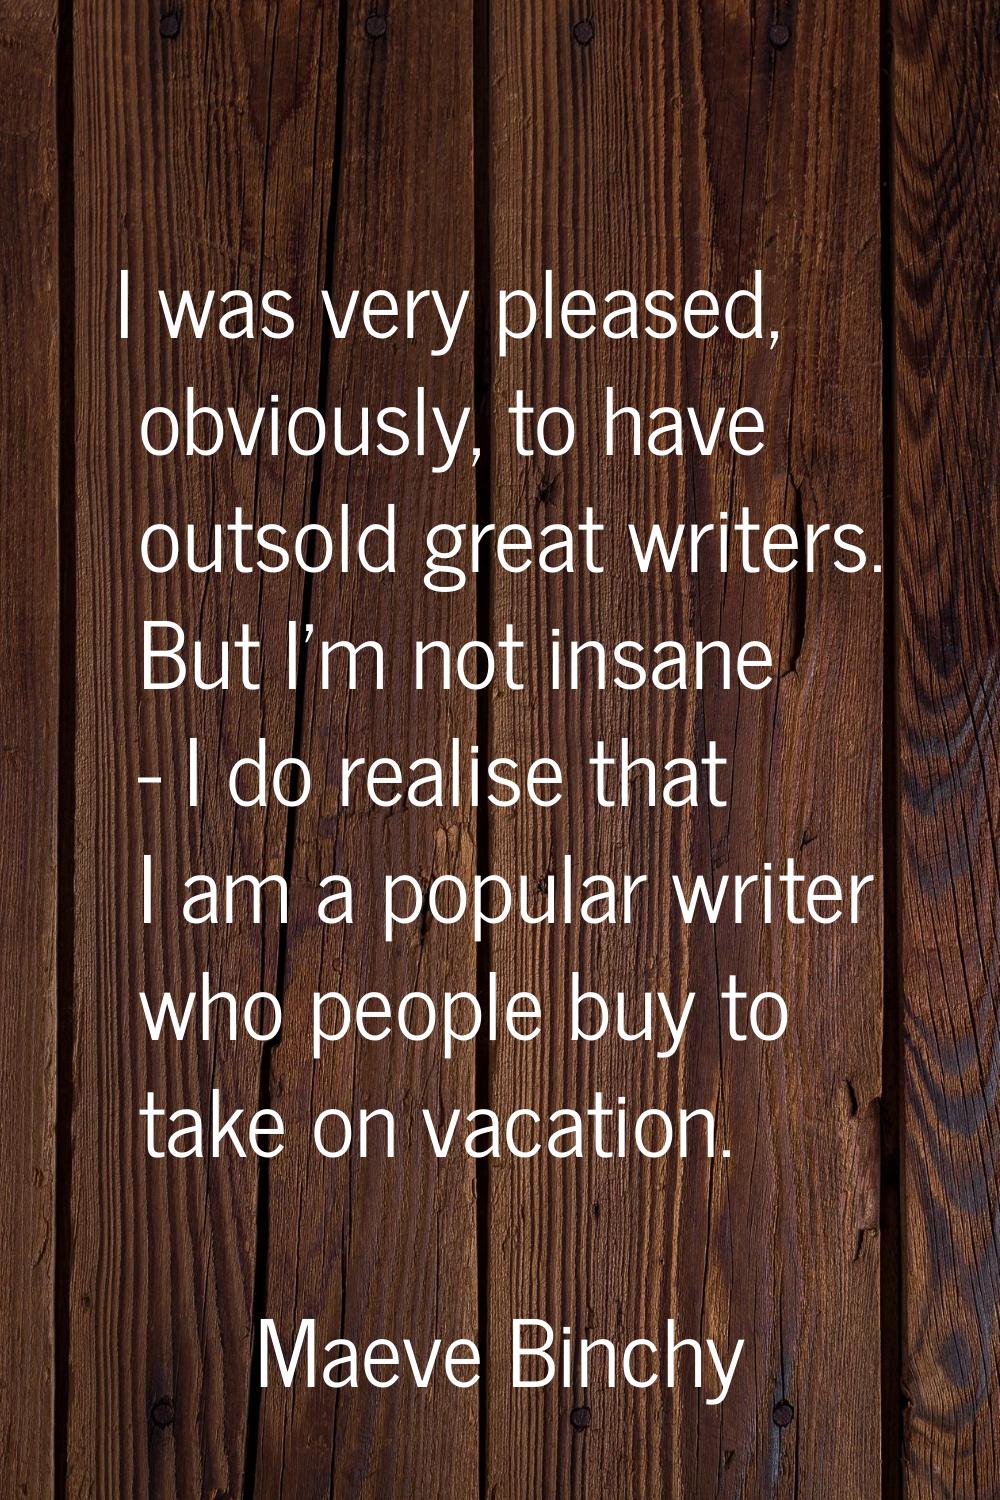 I was very pleased, obviously, to have outsold great writers. But I'm not insane - I do realise tha